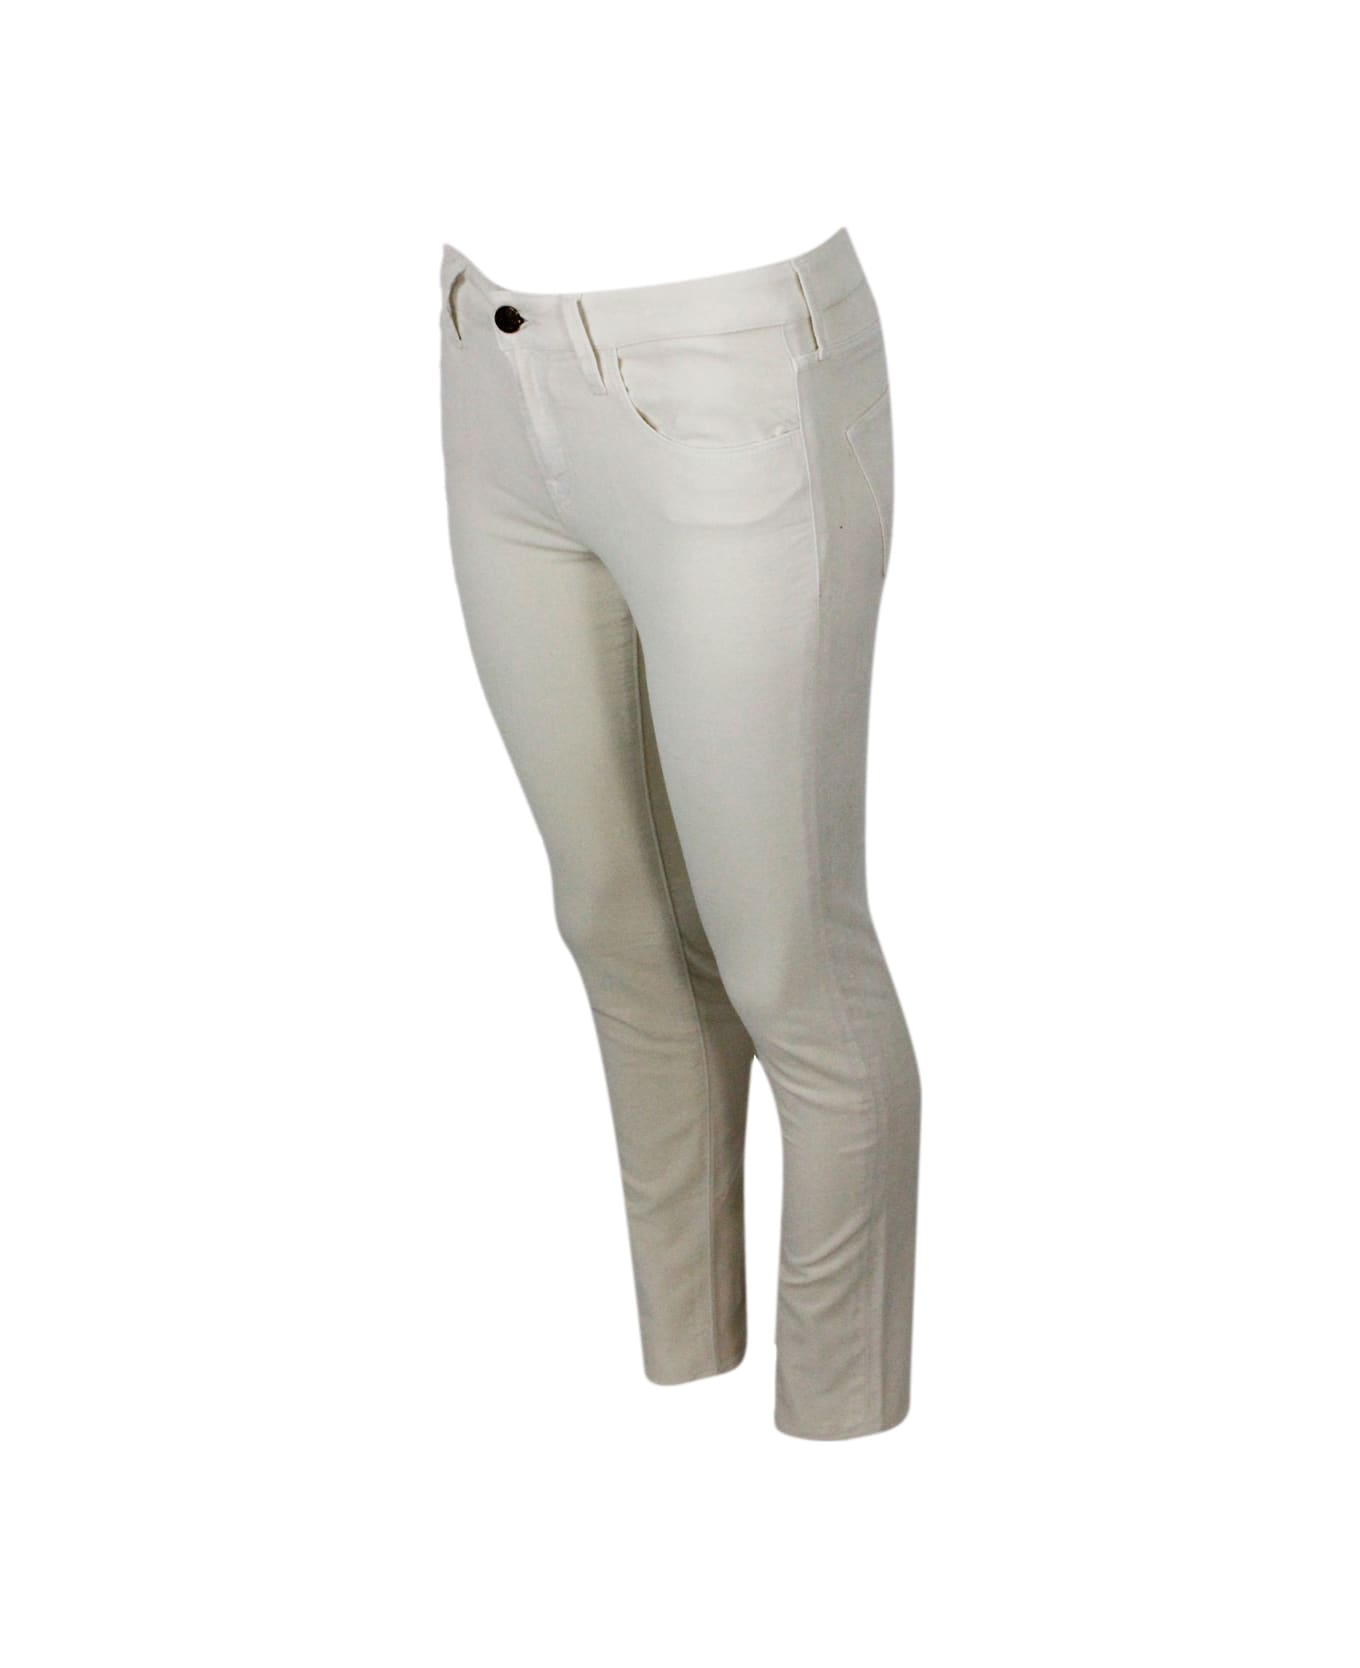 Jacob Cohen Kimberly Cigarette Cut Trousers In Soft Smooth Stretch Velvet With 5 Pockets With Zip And Button Closure. Skinny Regular Waist. Velvet Tag With Logo - Cream